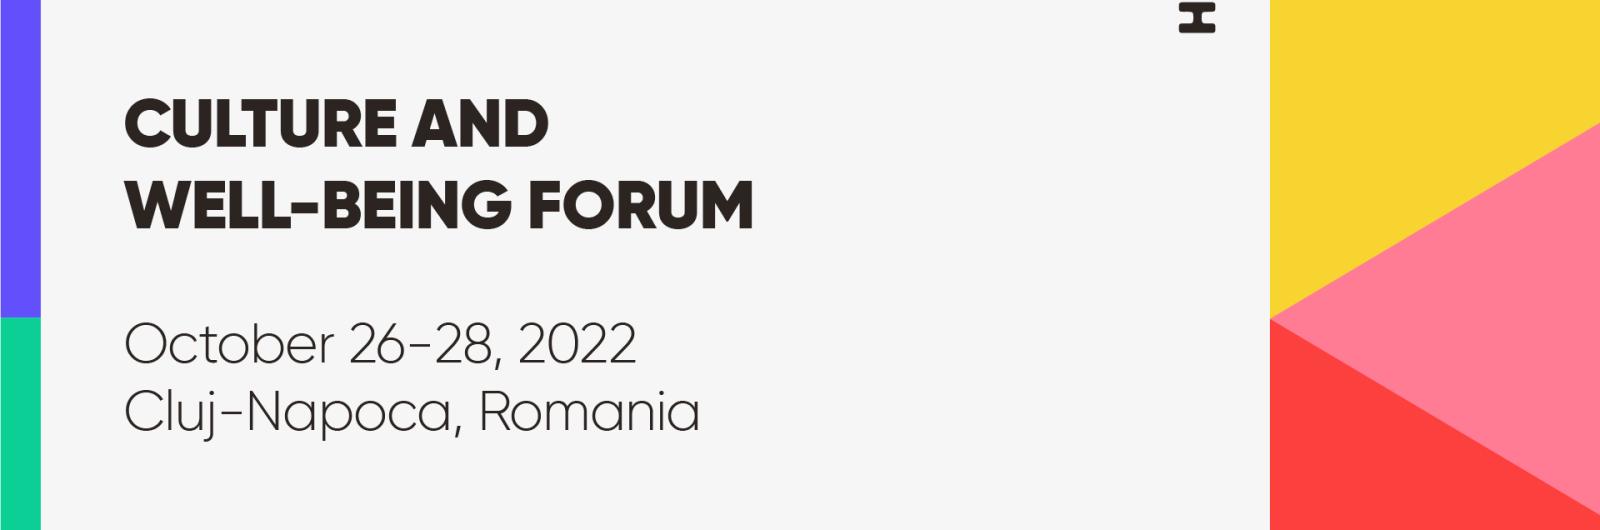 Culture and Well-being forum 2022